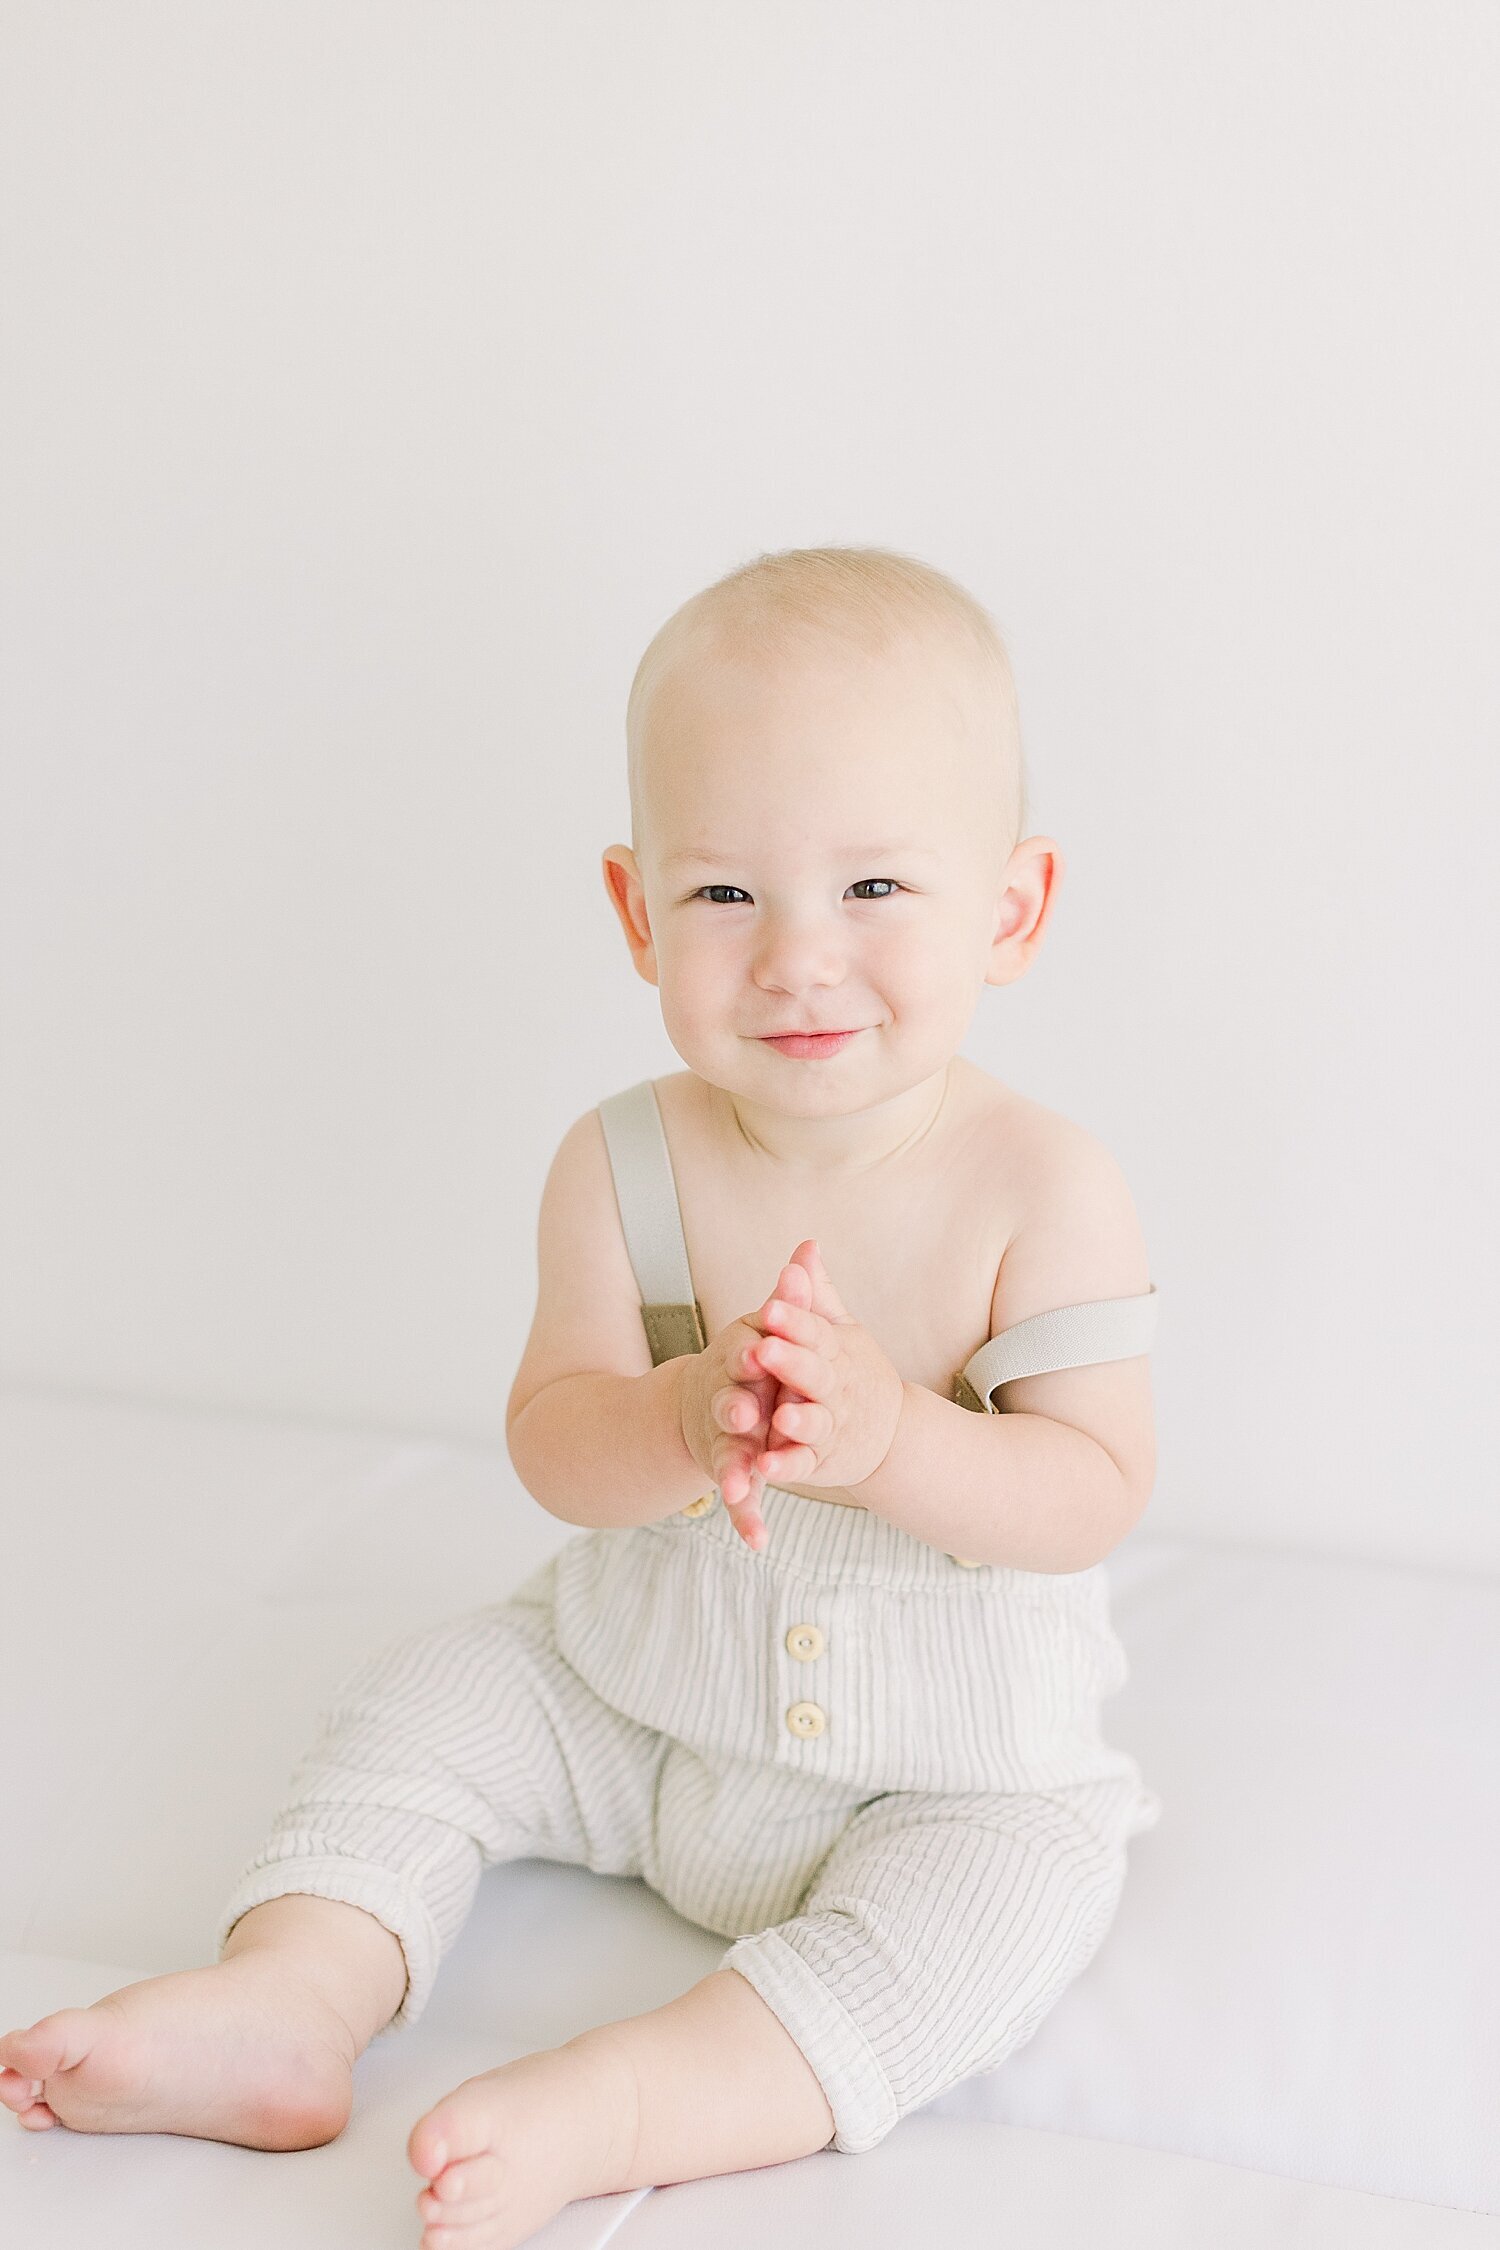 One year old clapping for photoshoot | Ambre Williams Photography